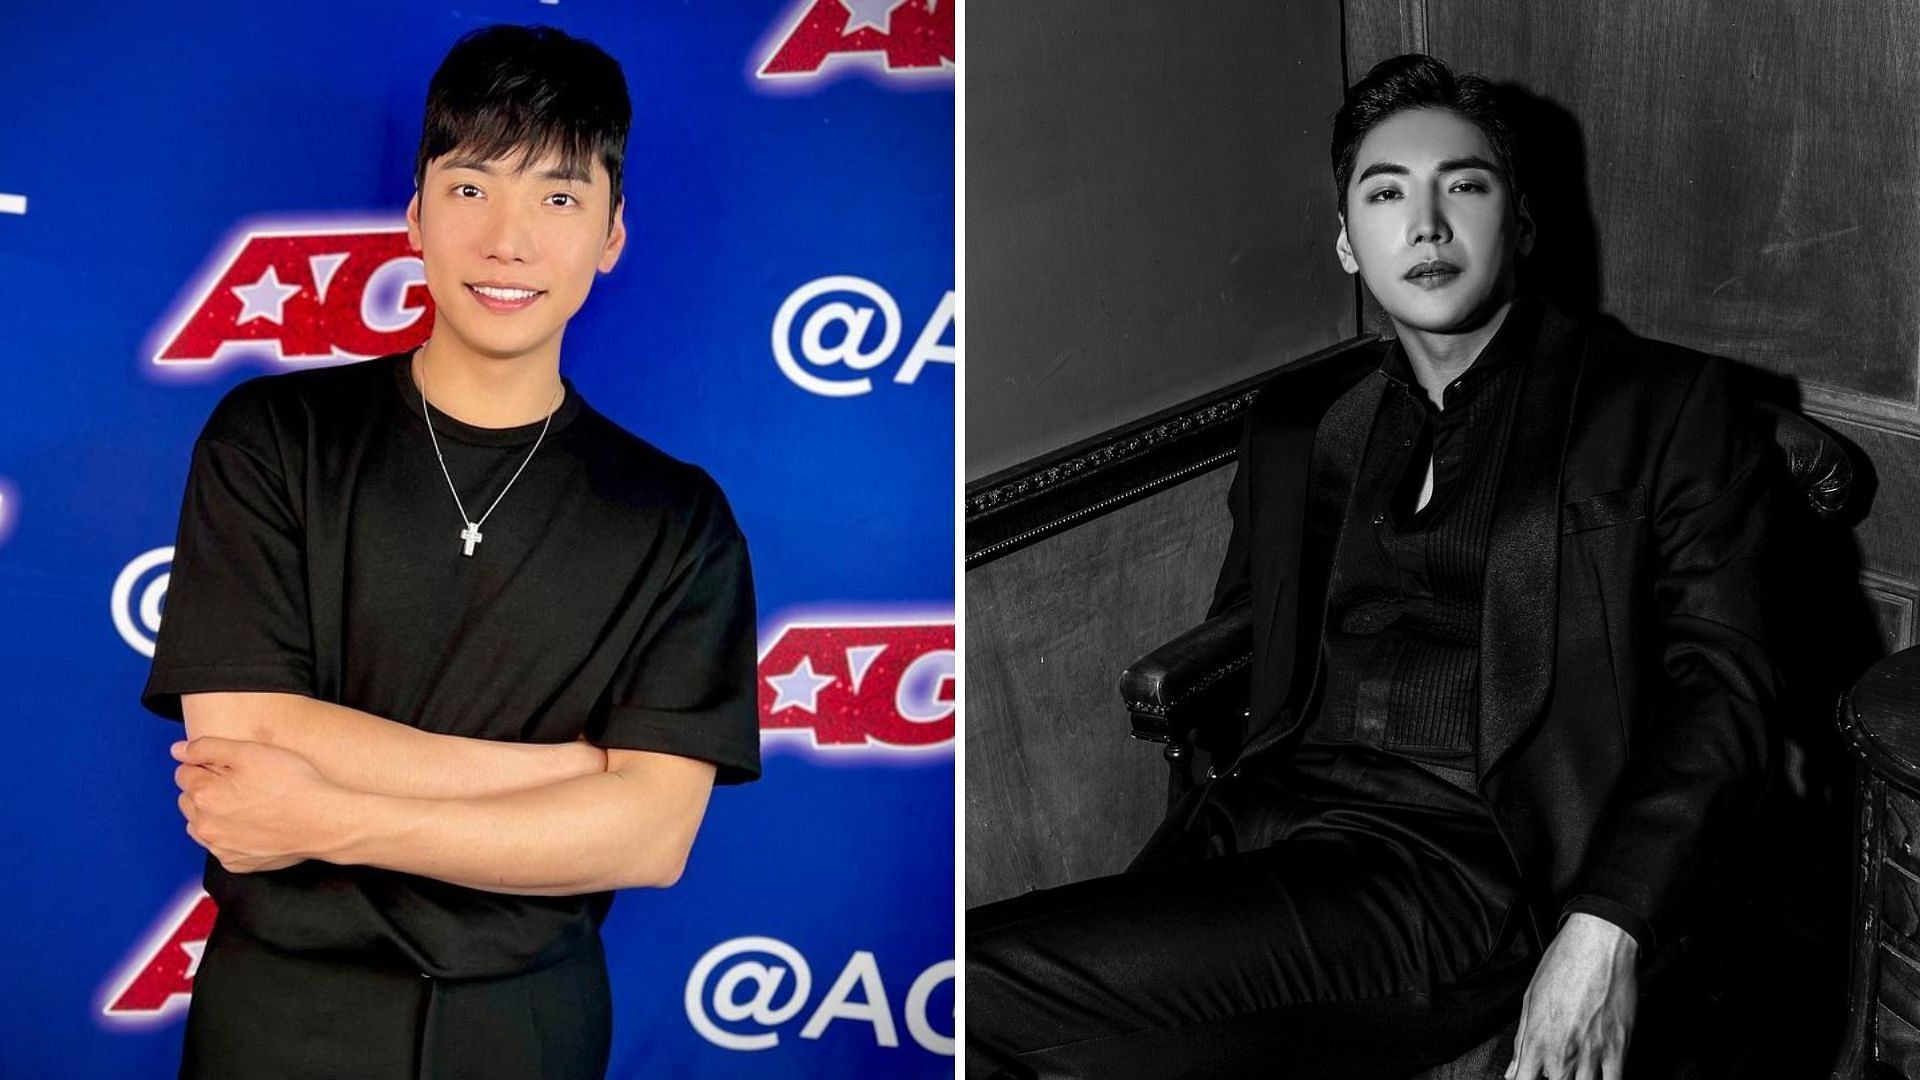 AGT contestant Yu Hojin makes his second appearance in the competition (Image via hojin_yu/Instagram)